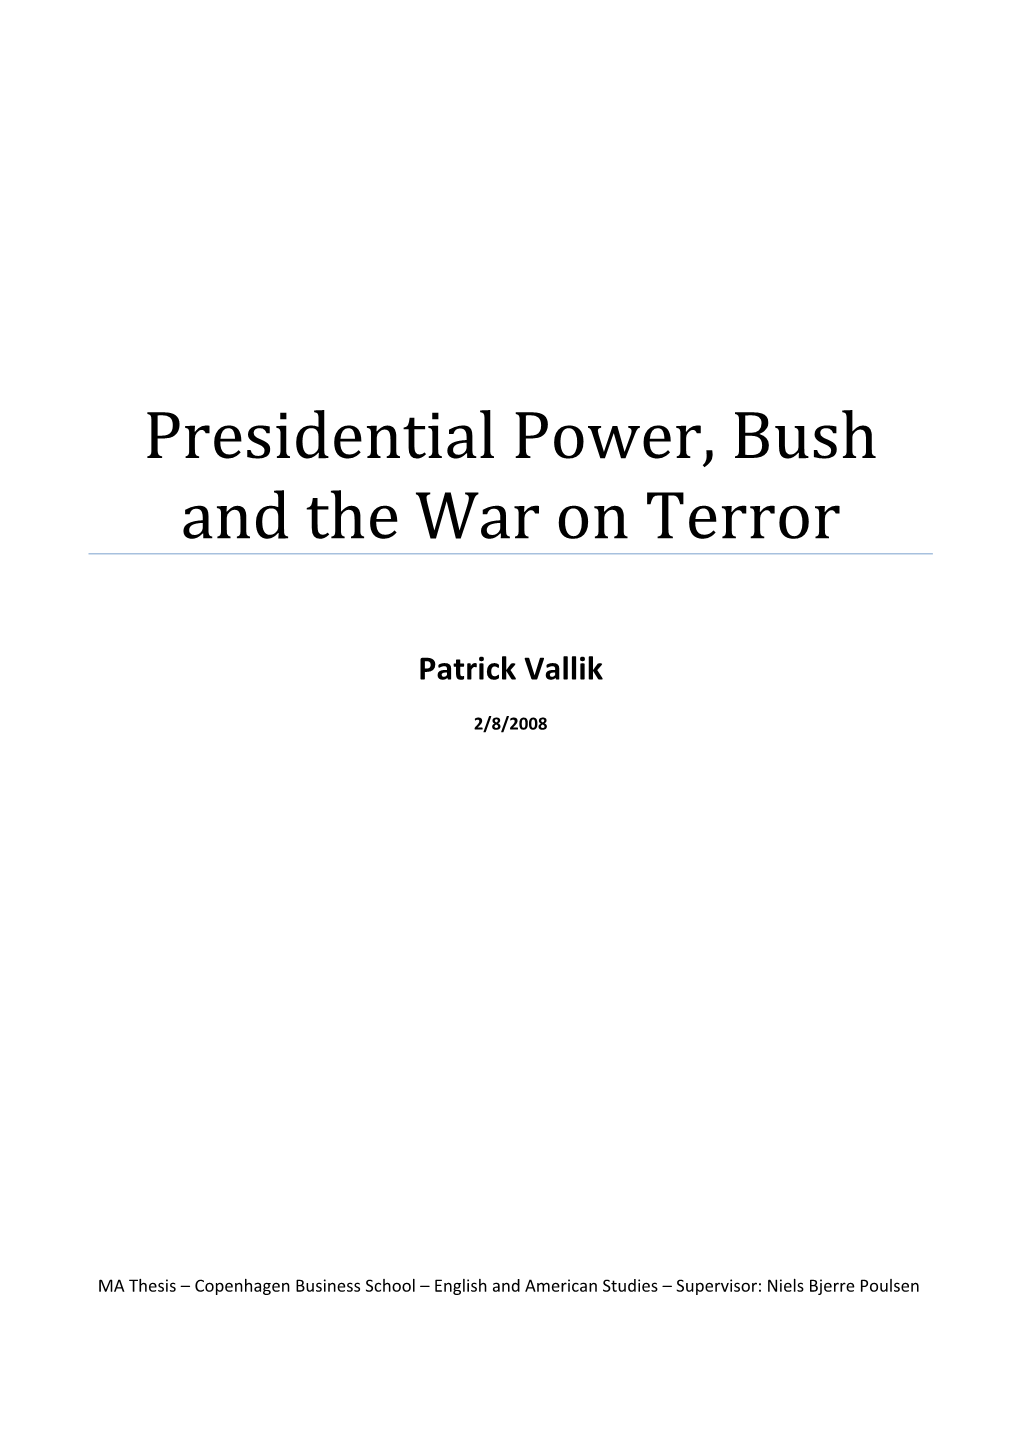 Presidential Power, Bush and the War on Terror